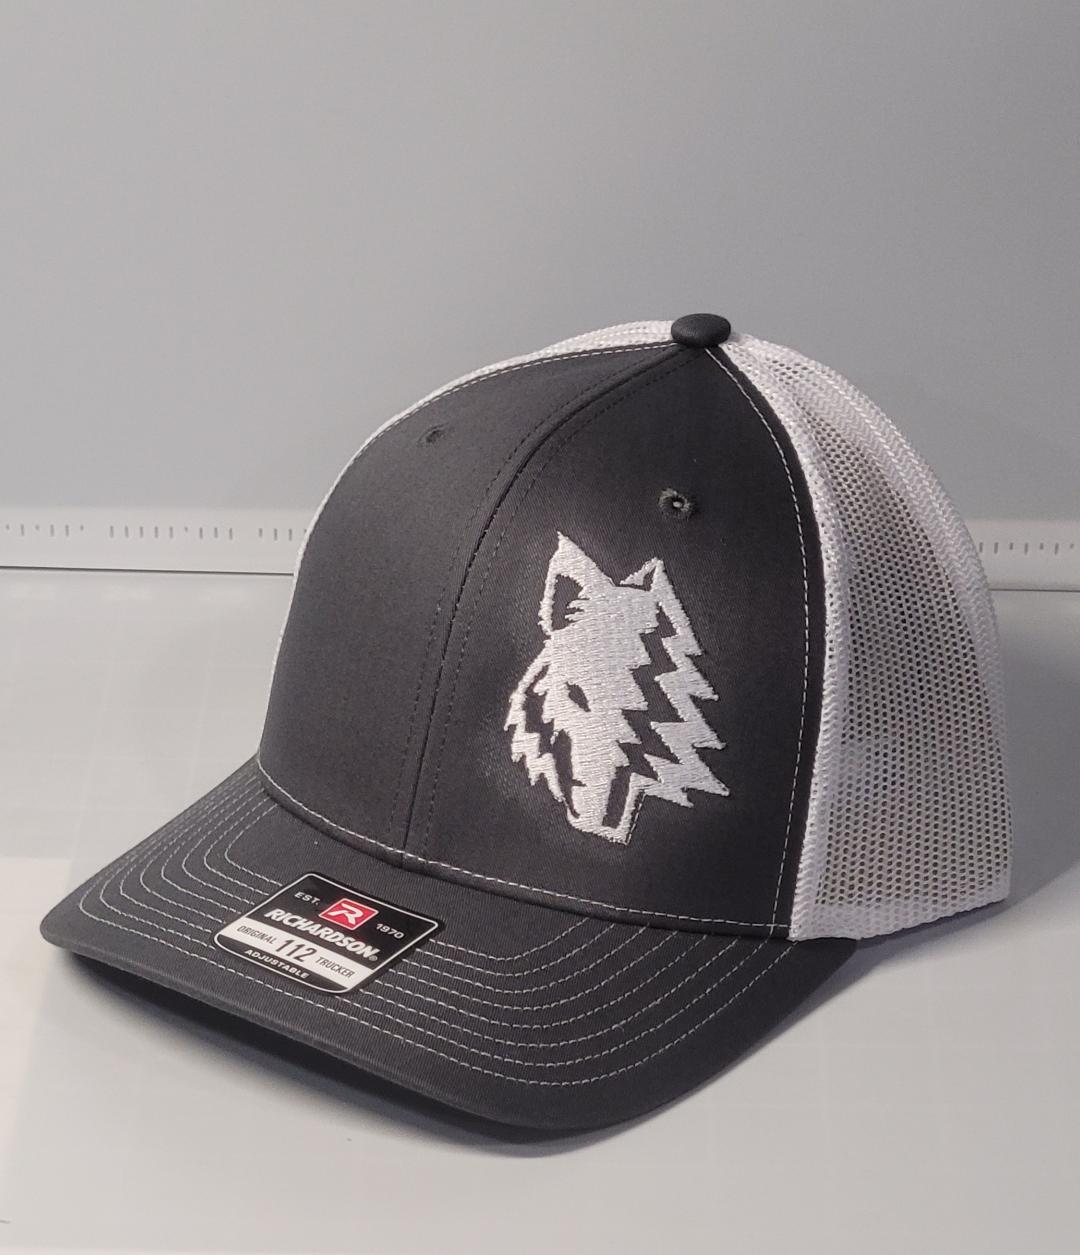 BrushMonster Snapback Hat- Color options available